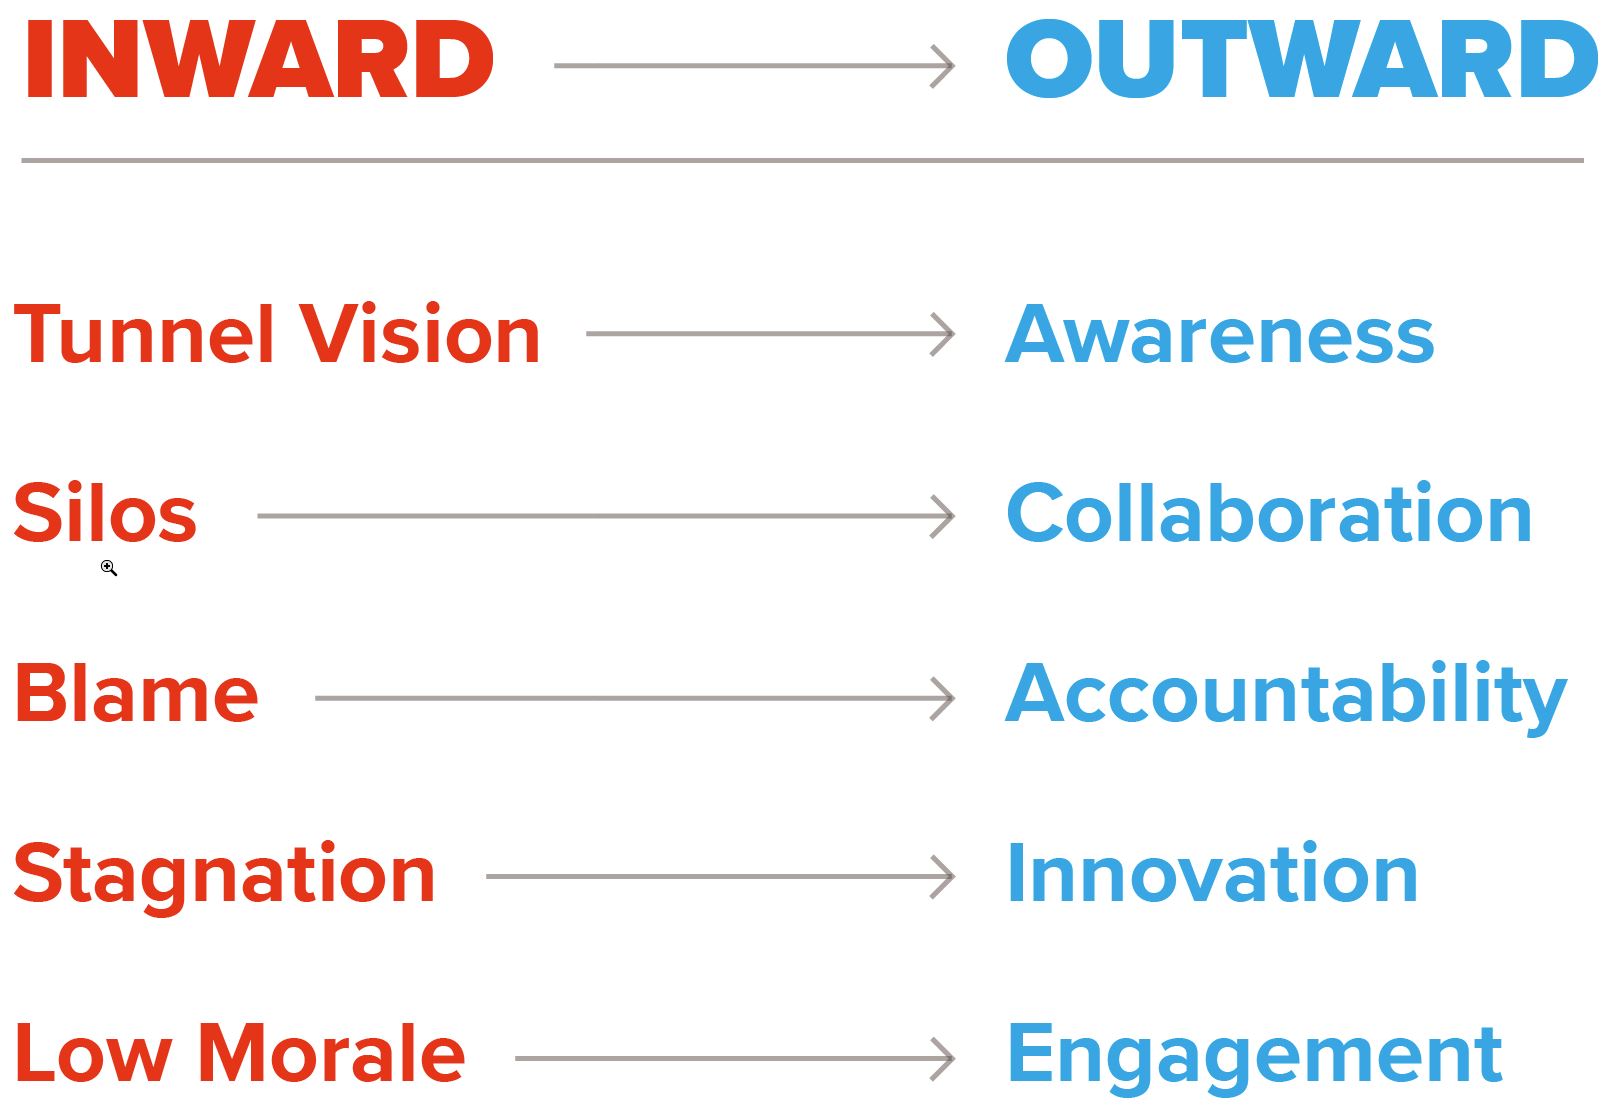 This image describes the different characteristics of inward and outward mindsets. When we move from an inward to an outward mindset, we move from tunnel vision to awareness; from silos to collaboration; from blame to accountability; from stagnation to innovation; and from low morale to engagement.